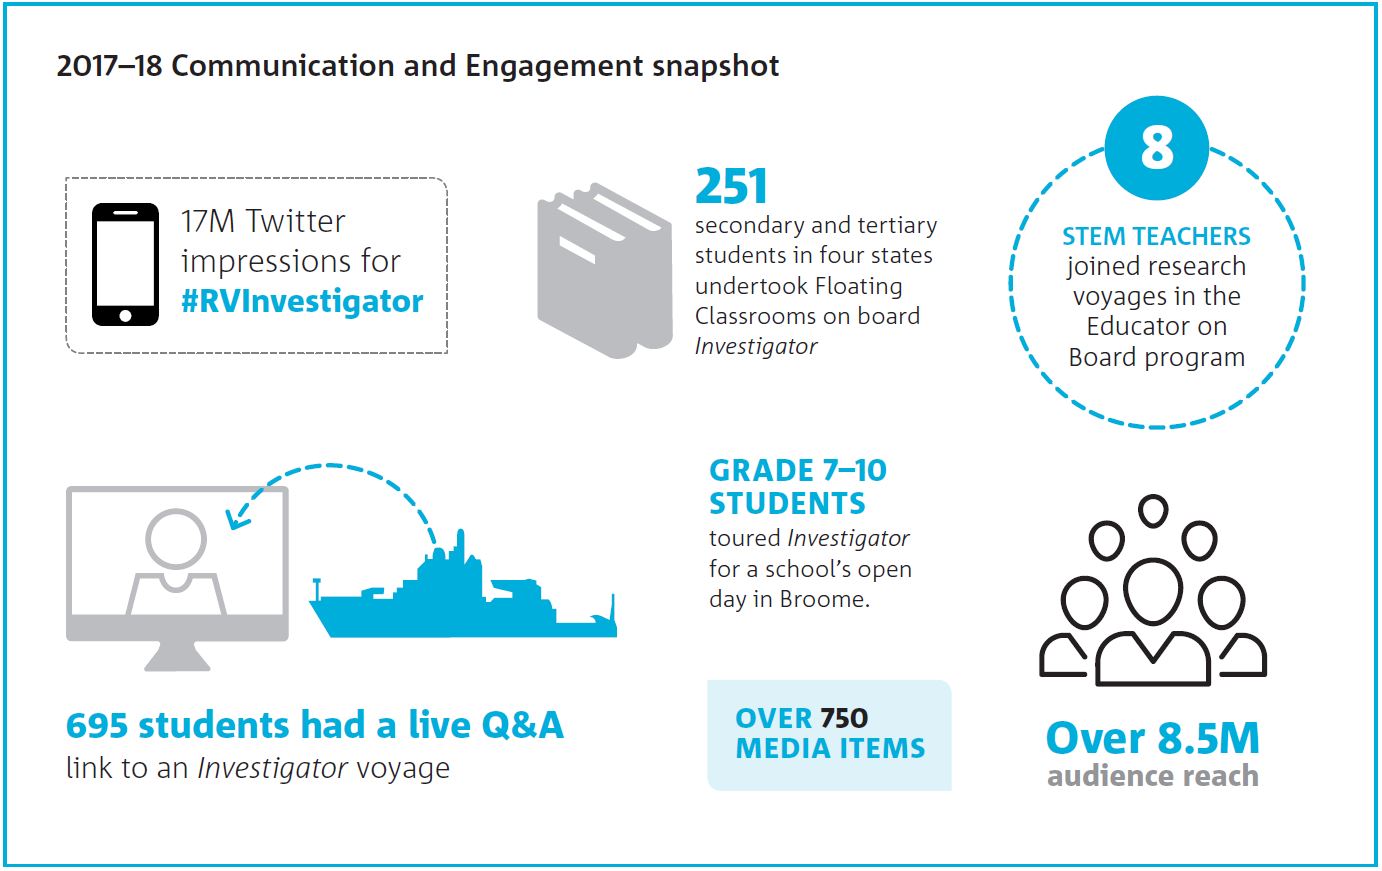 Infographic showing stats for communications and engagement in 2017-18.